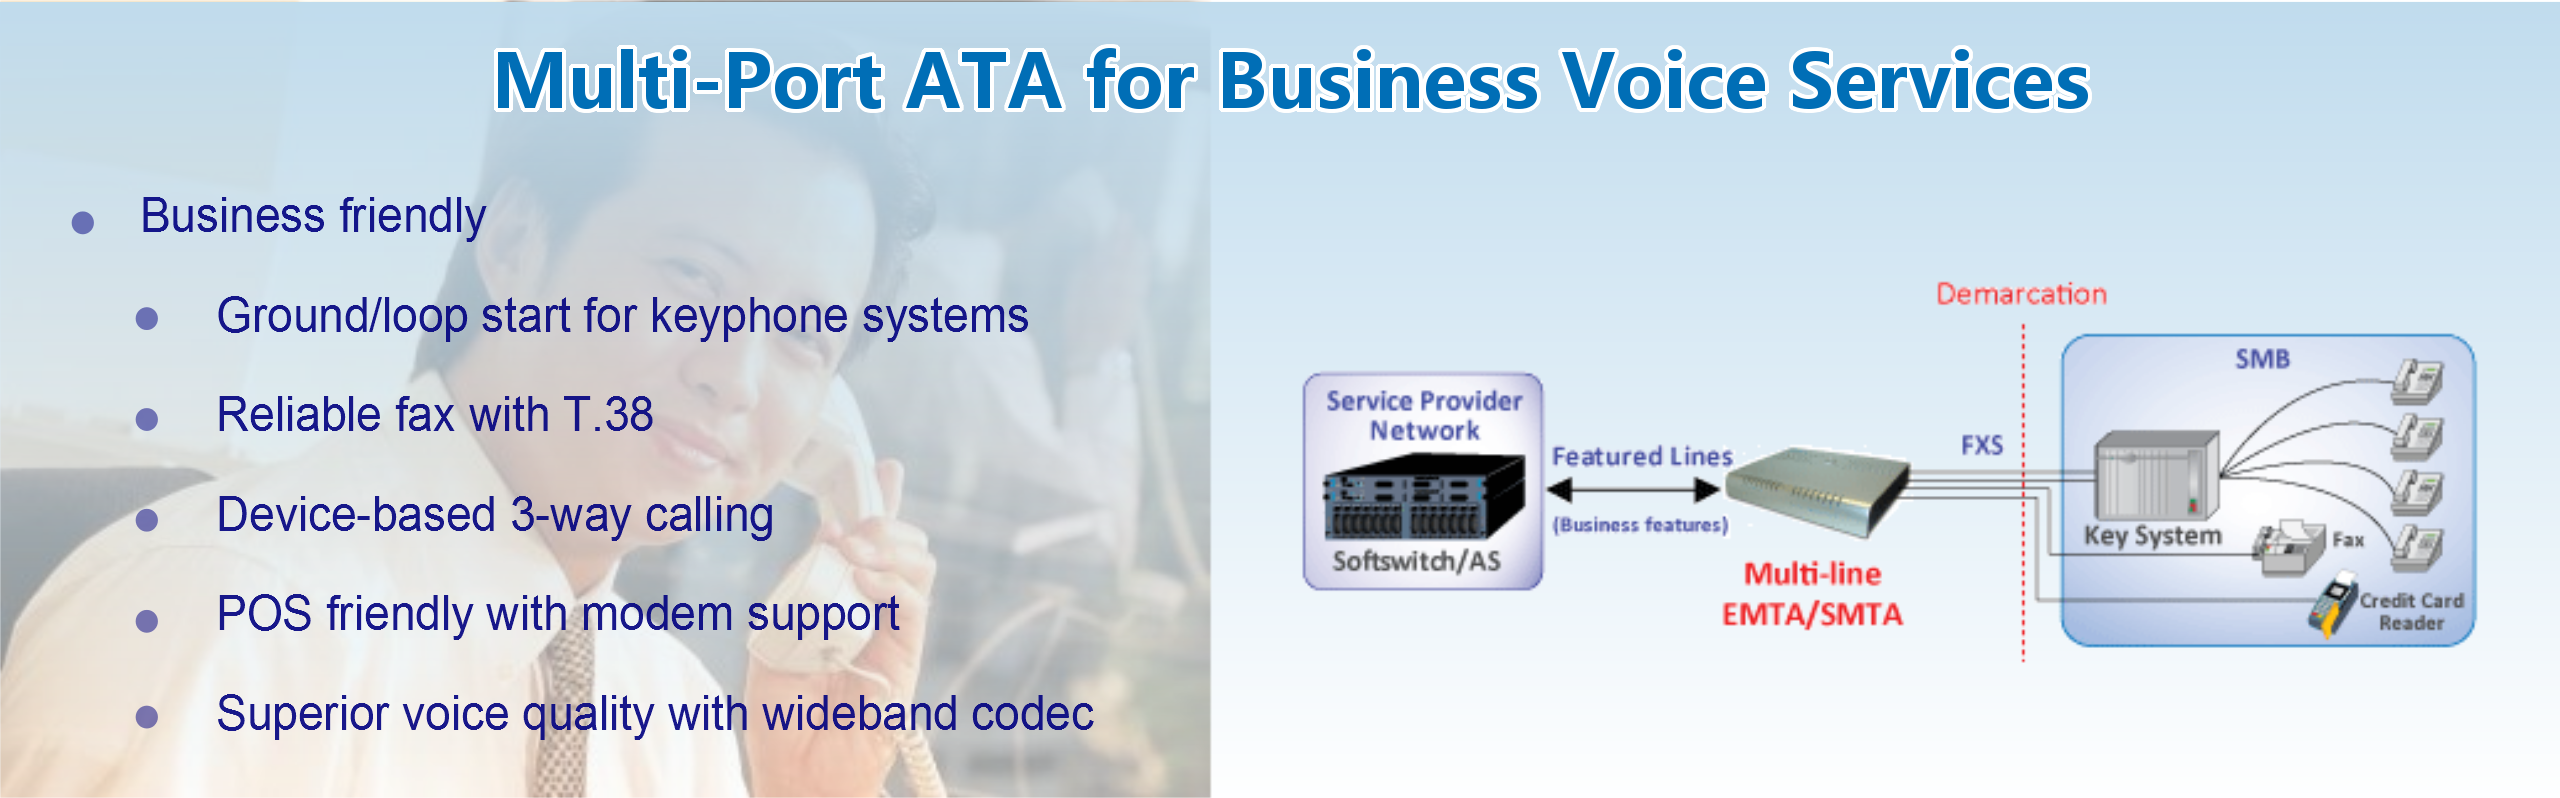 Multi-Port ATA for Business Voice Services